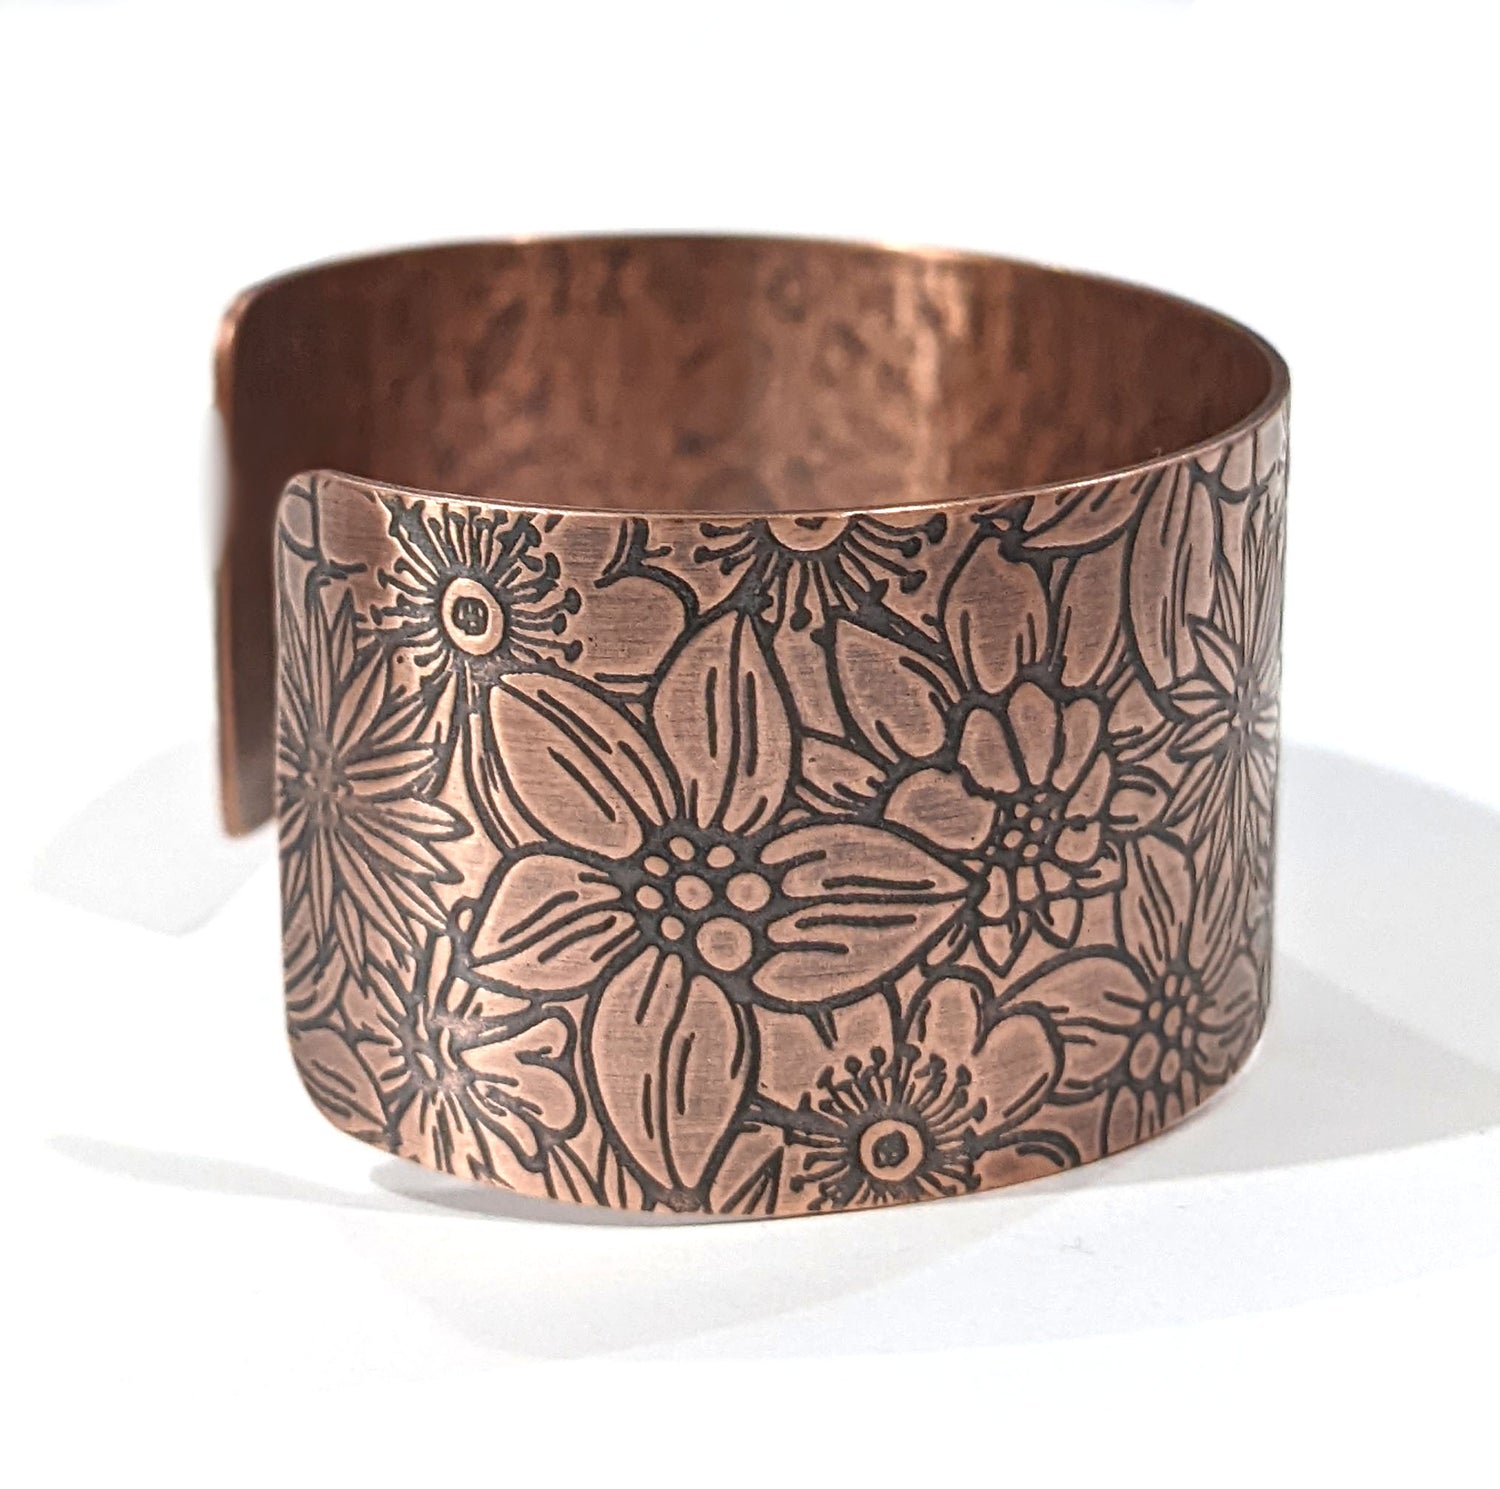 Wide copper bracelet with impressed design of flowers. The entire cuff is covered in various kinds of flowers in full bloom. Side view